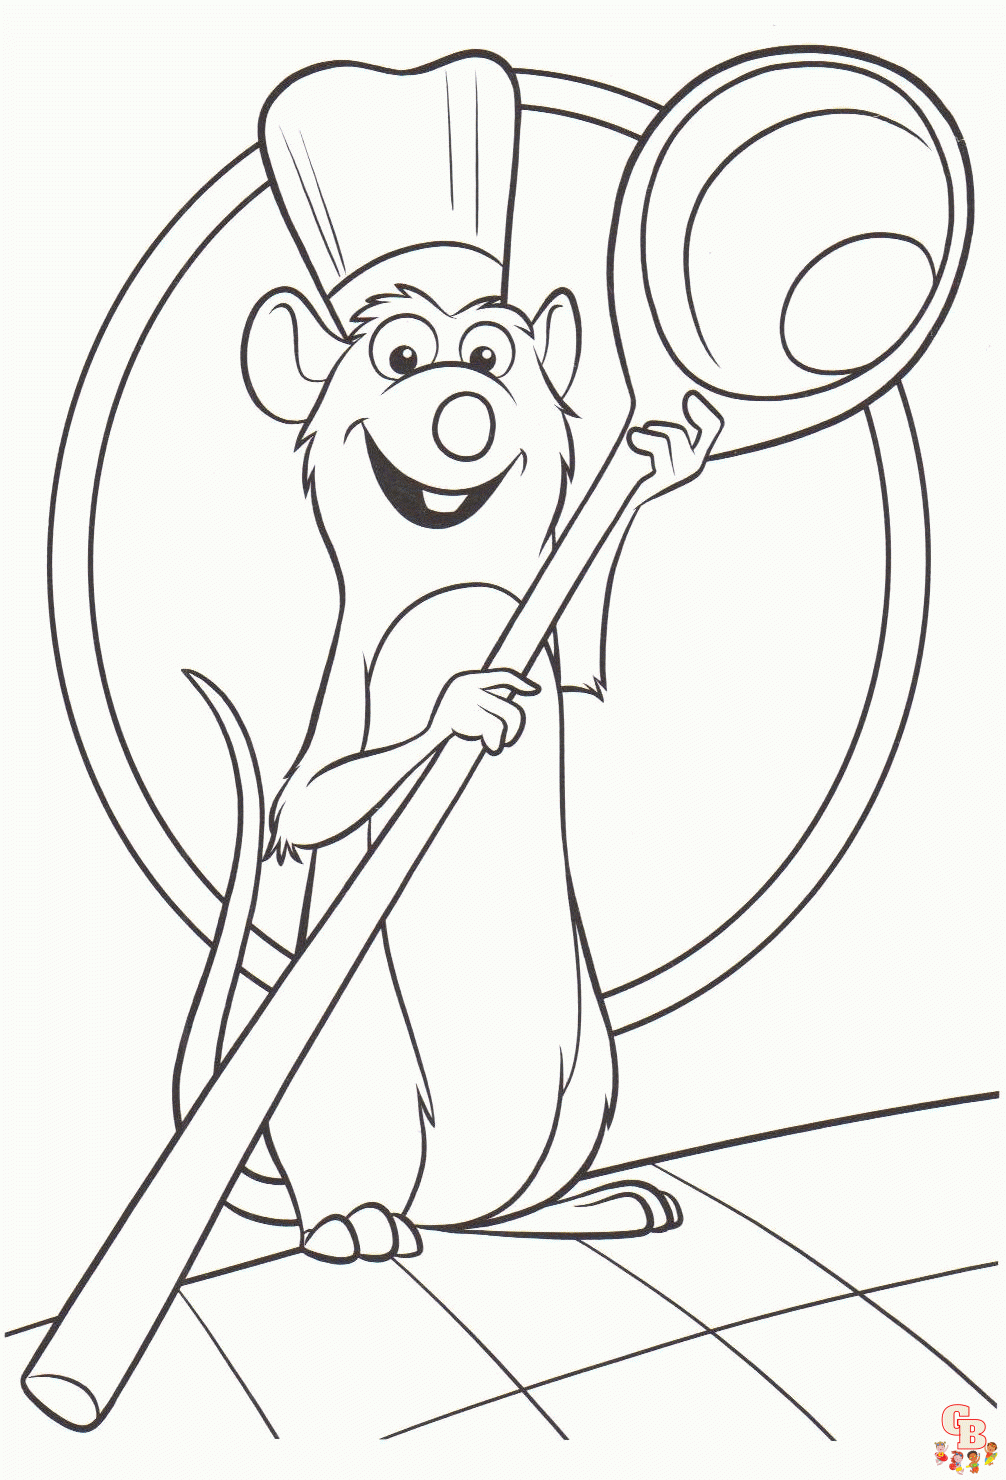 Ratatouille coloring pages for kids